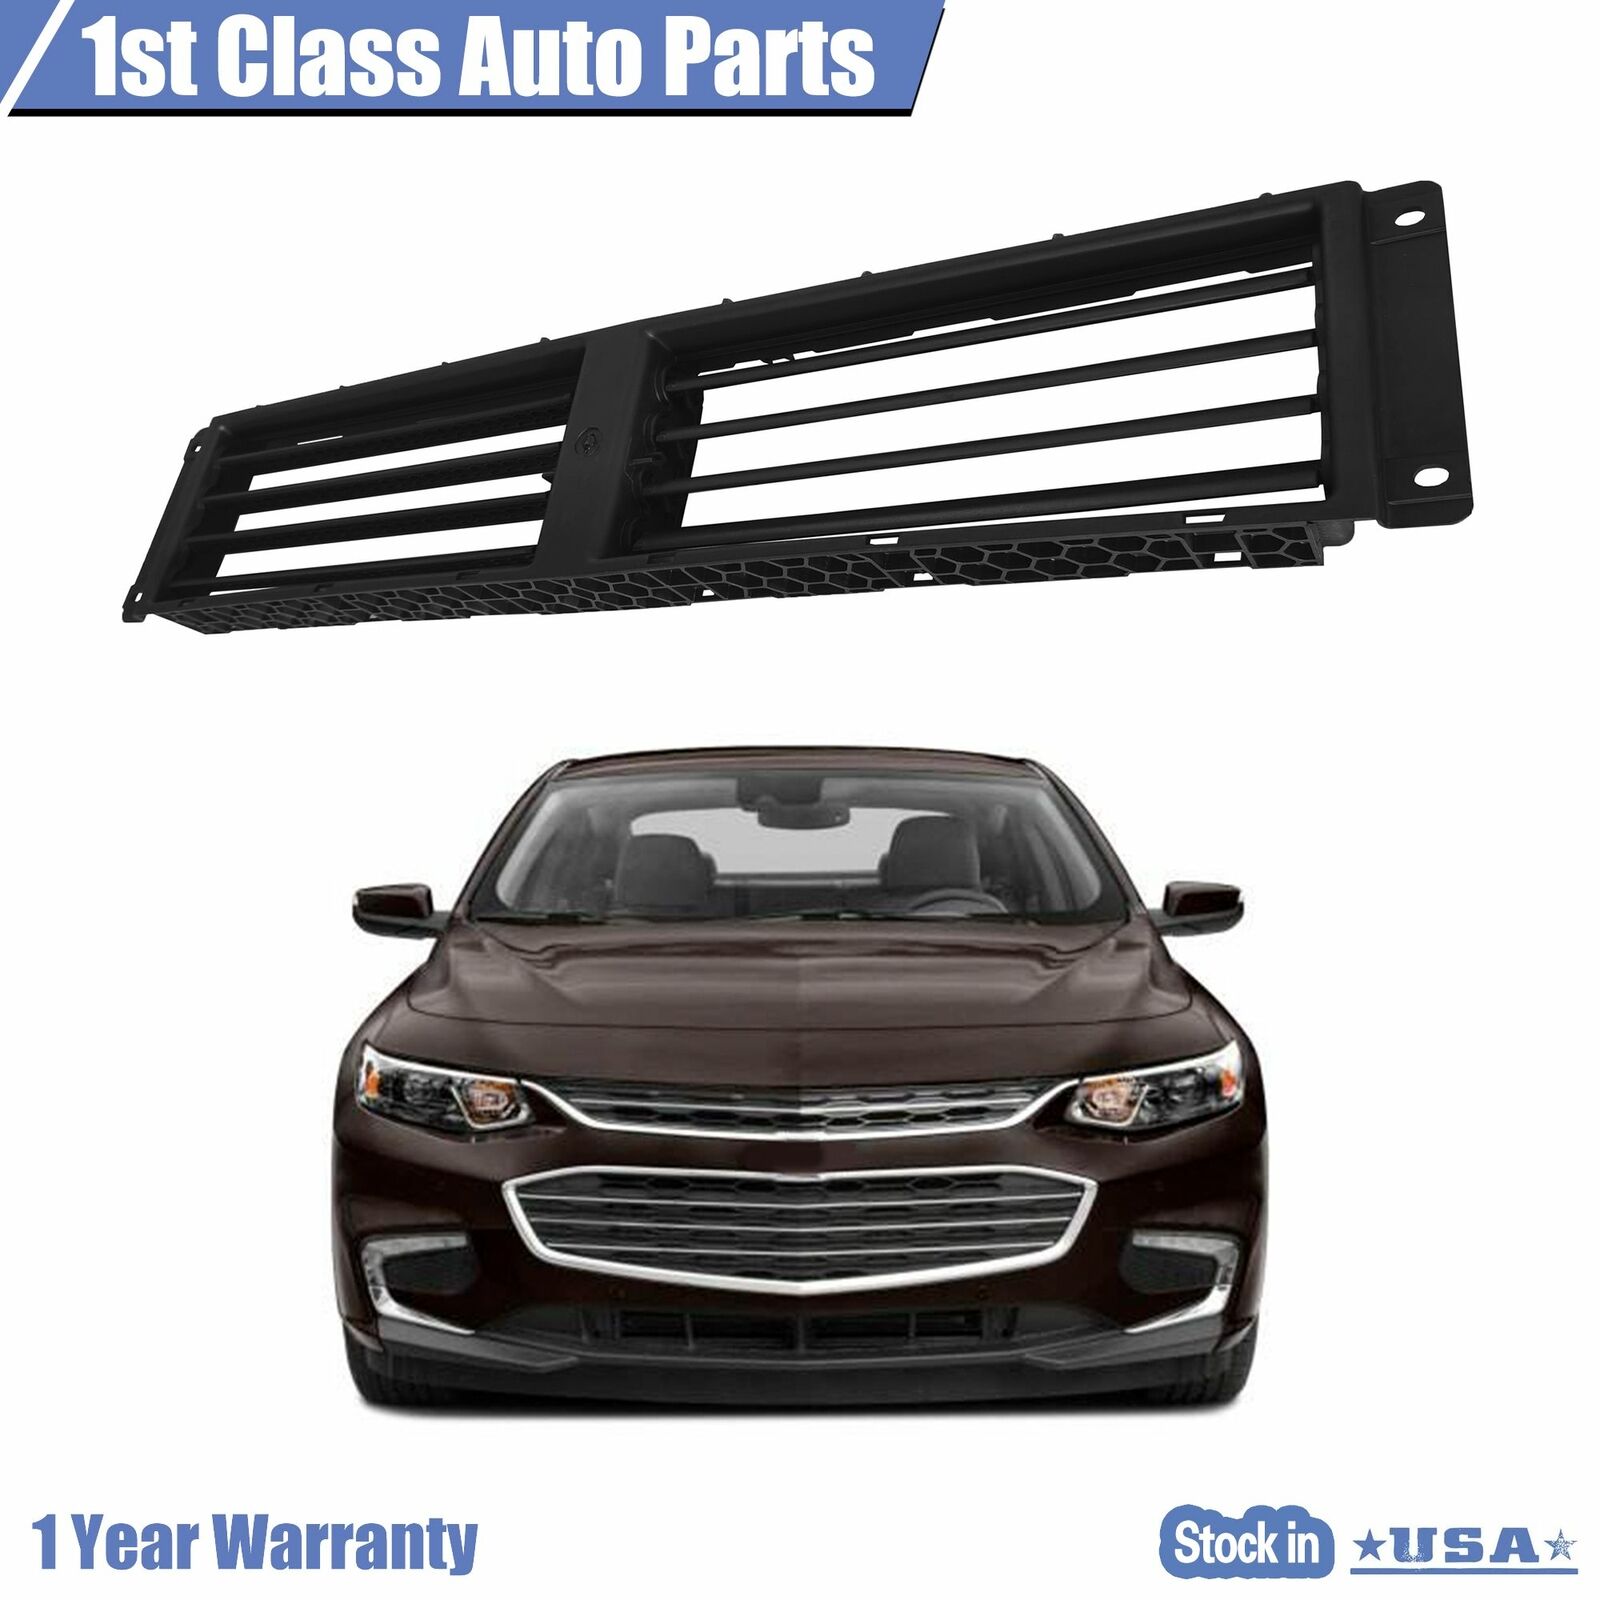 Front Air Intake Bumper Grille Shutter For Chevrolet Malibu Buick LaCrosse